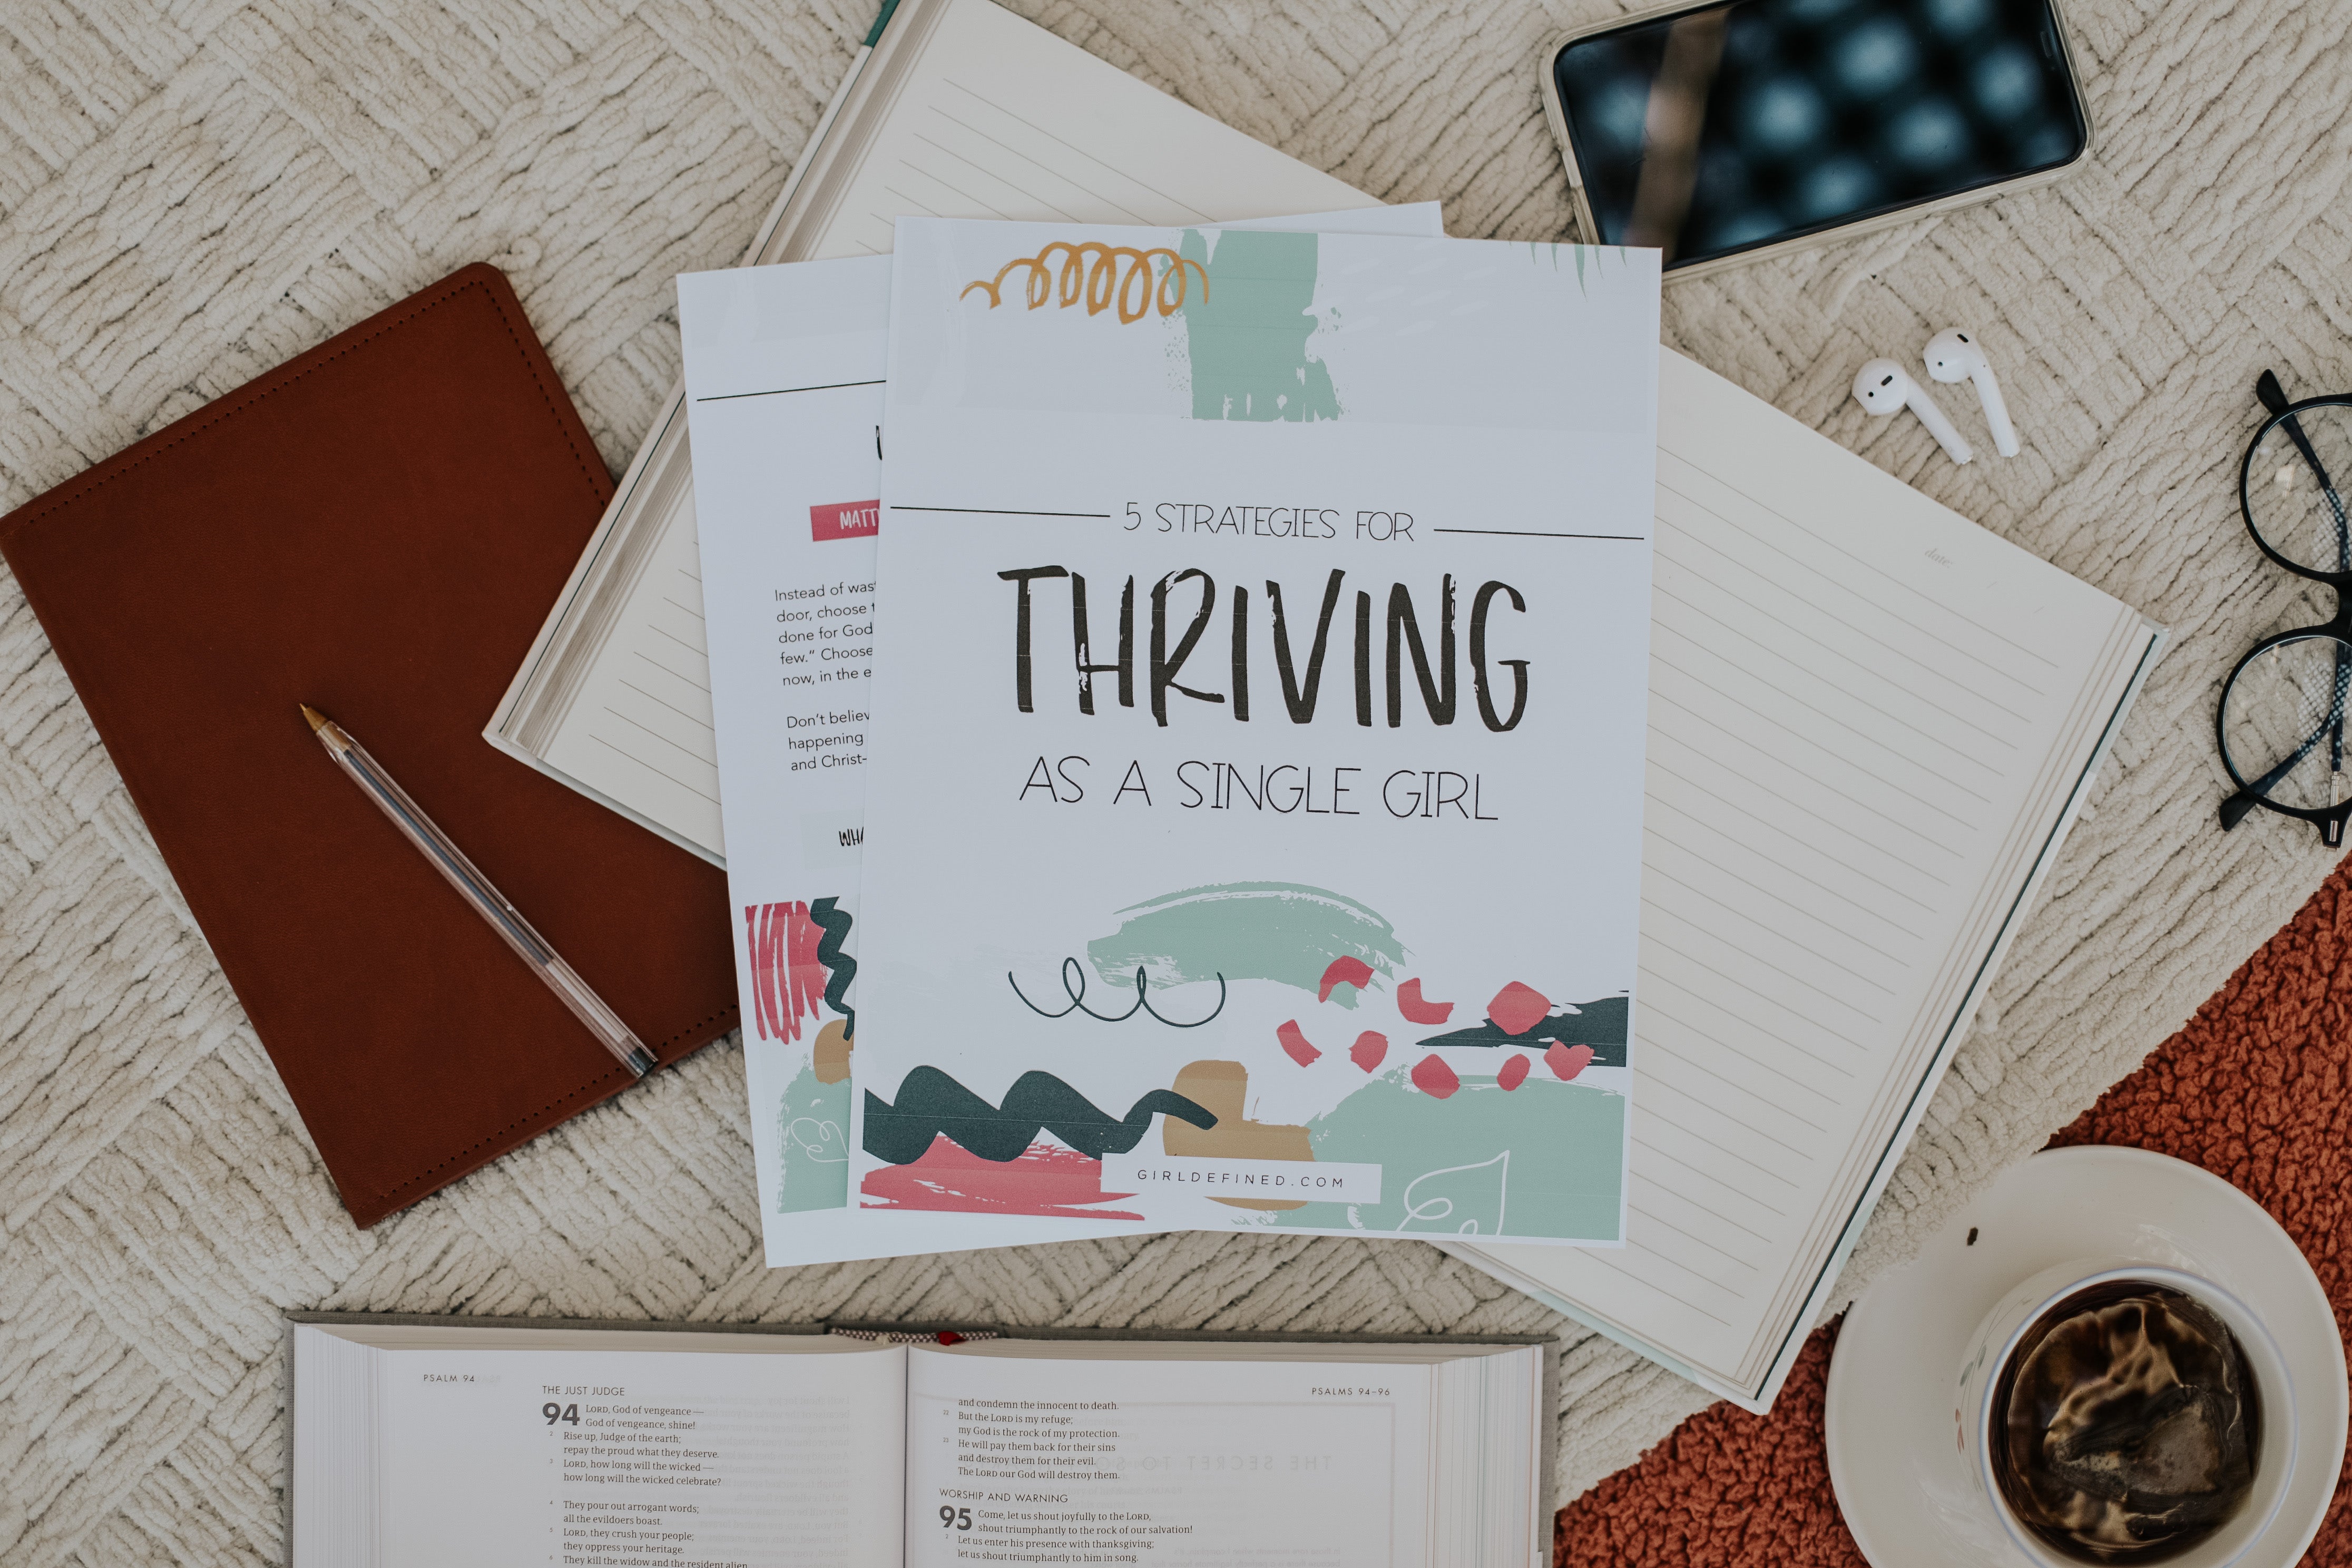 5 Strategies to Thrive as a Single Girl (PDF Download)